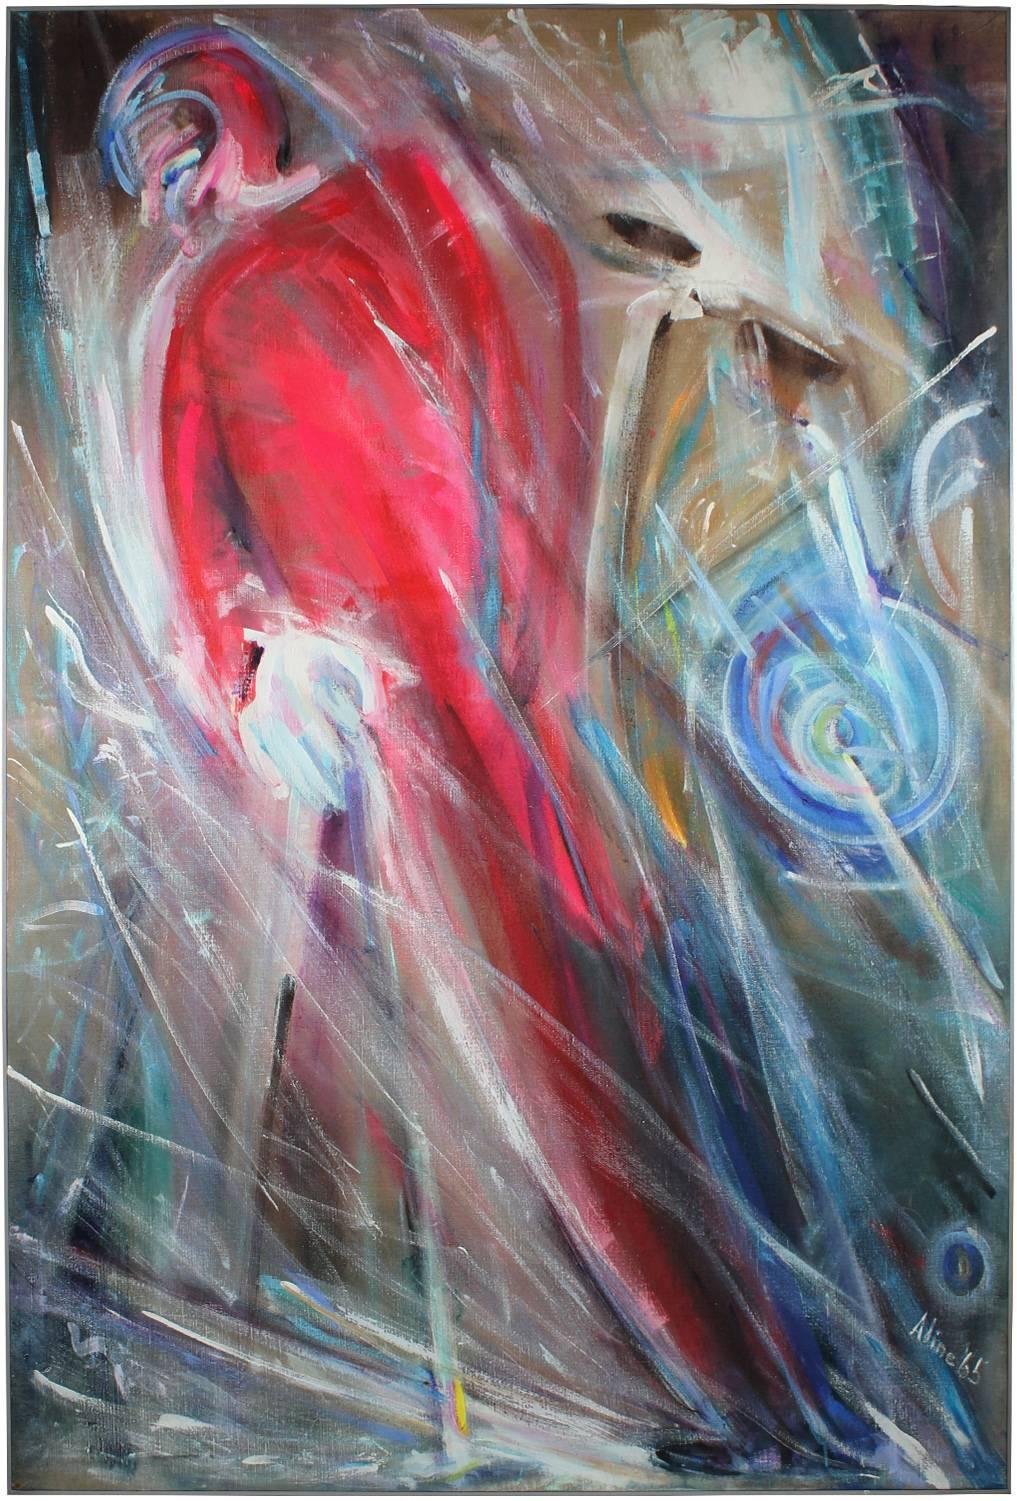 Adine Stix Abstract Painting - Large Figurative Expressionist Oil on Canvas, 1965